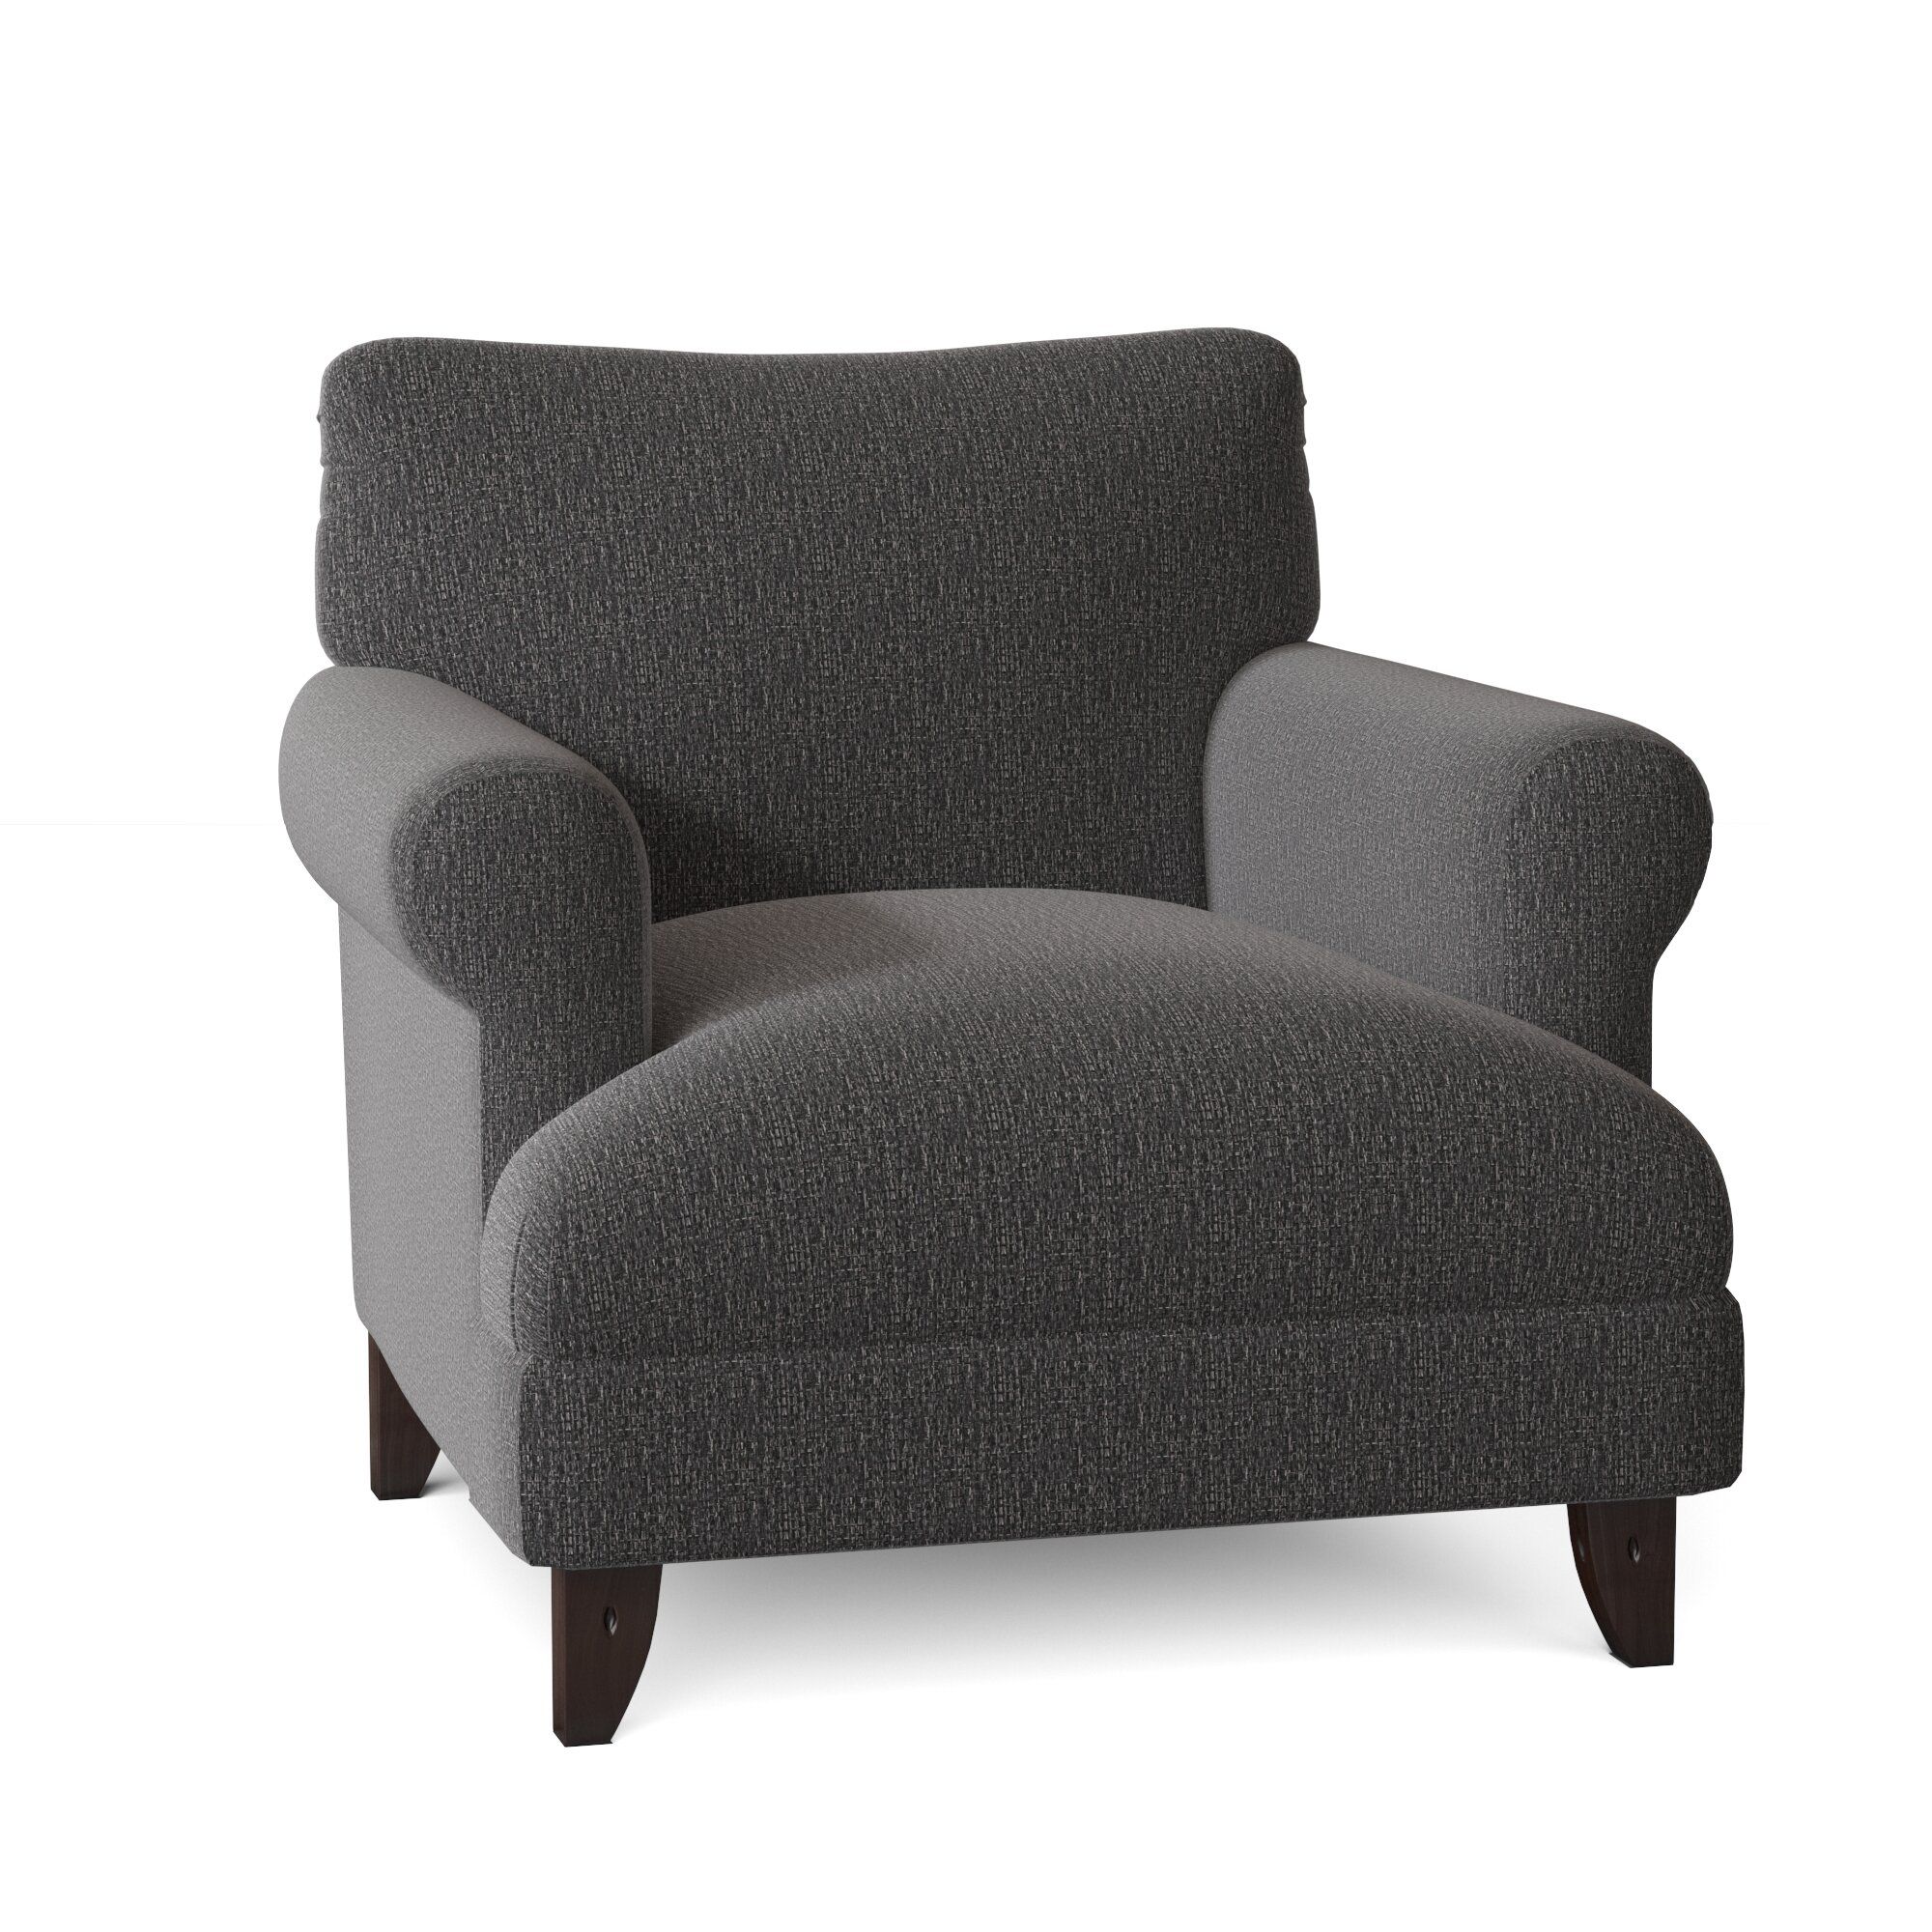 Black Silver Accent Chairs You'Ll Love In 2021 | Wayfair Pertaining To Brookhhurst Avina Armchairs (View 10 of 15)